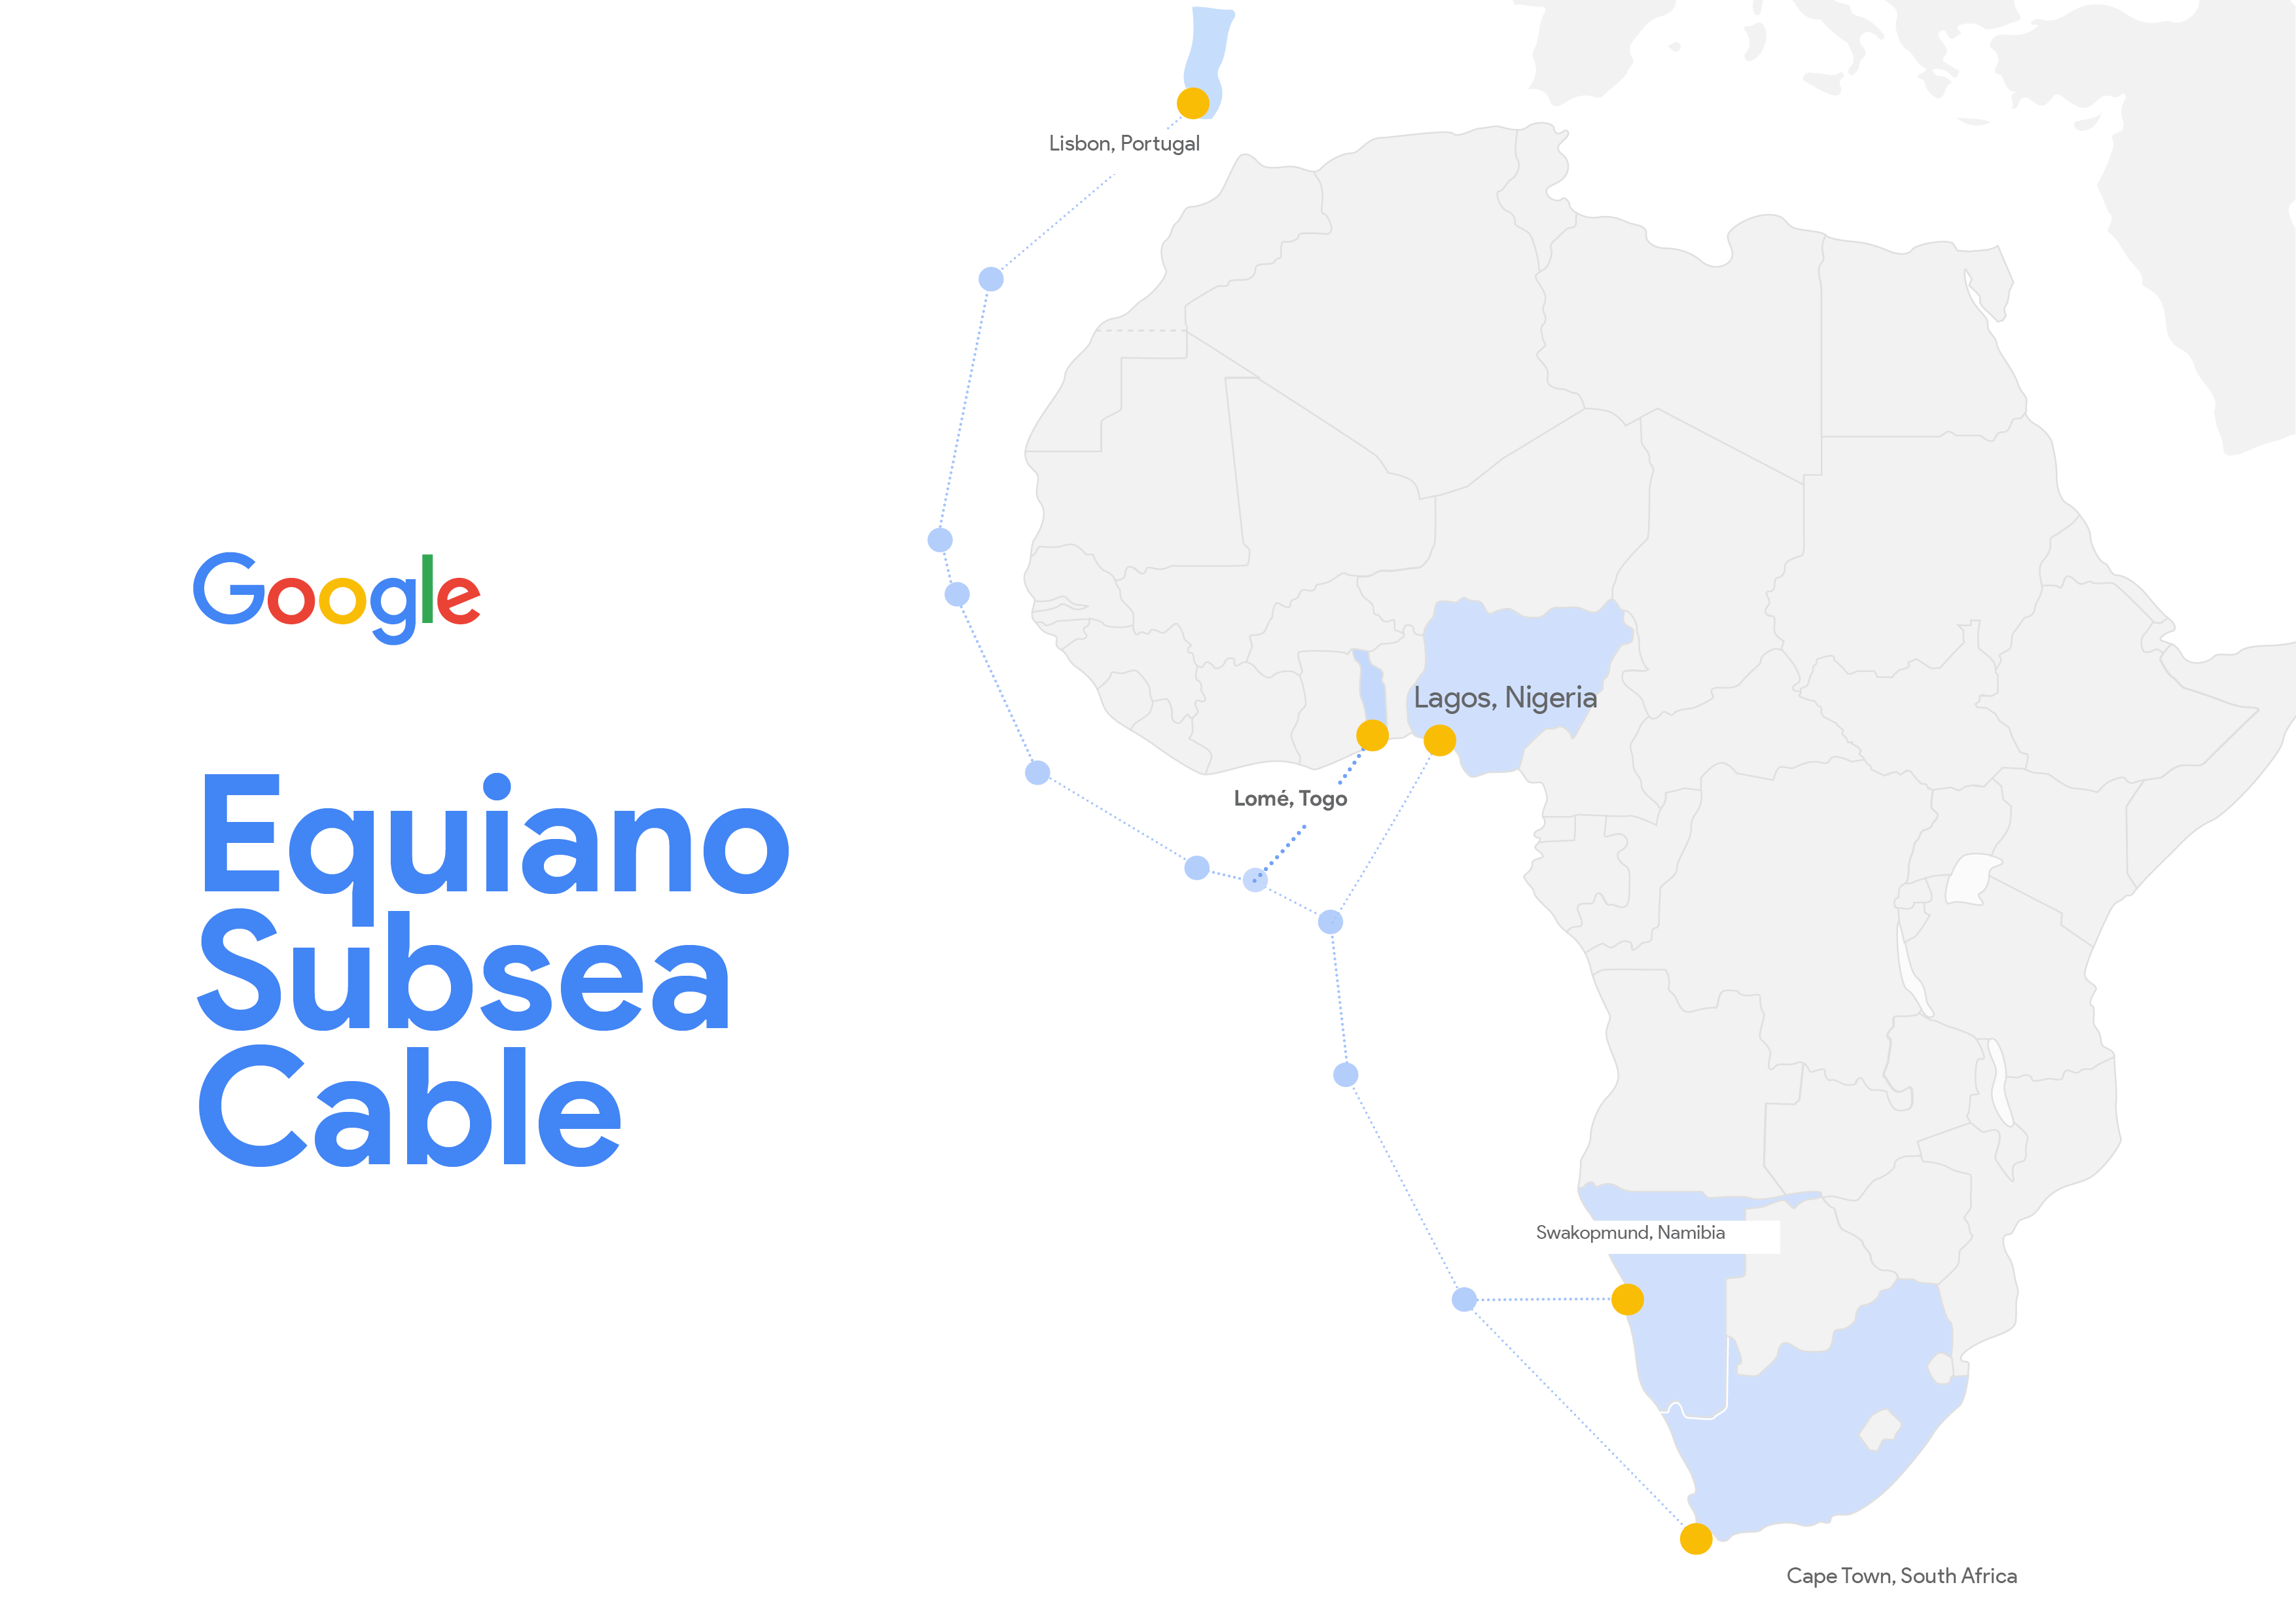 Equiano Subsea Internet Cable